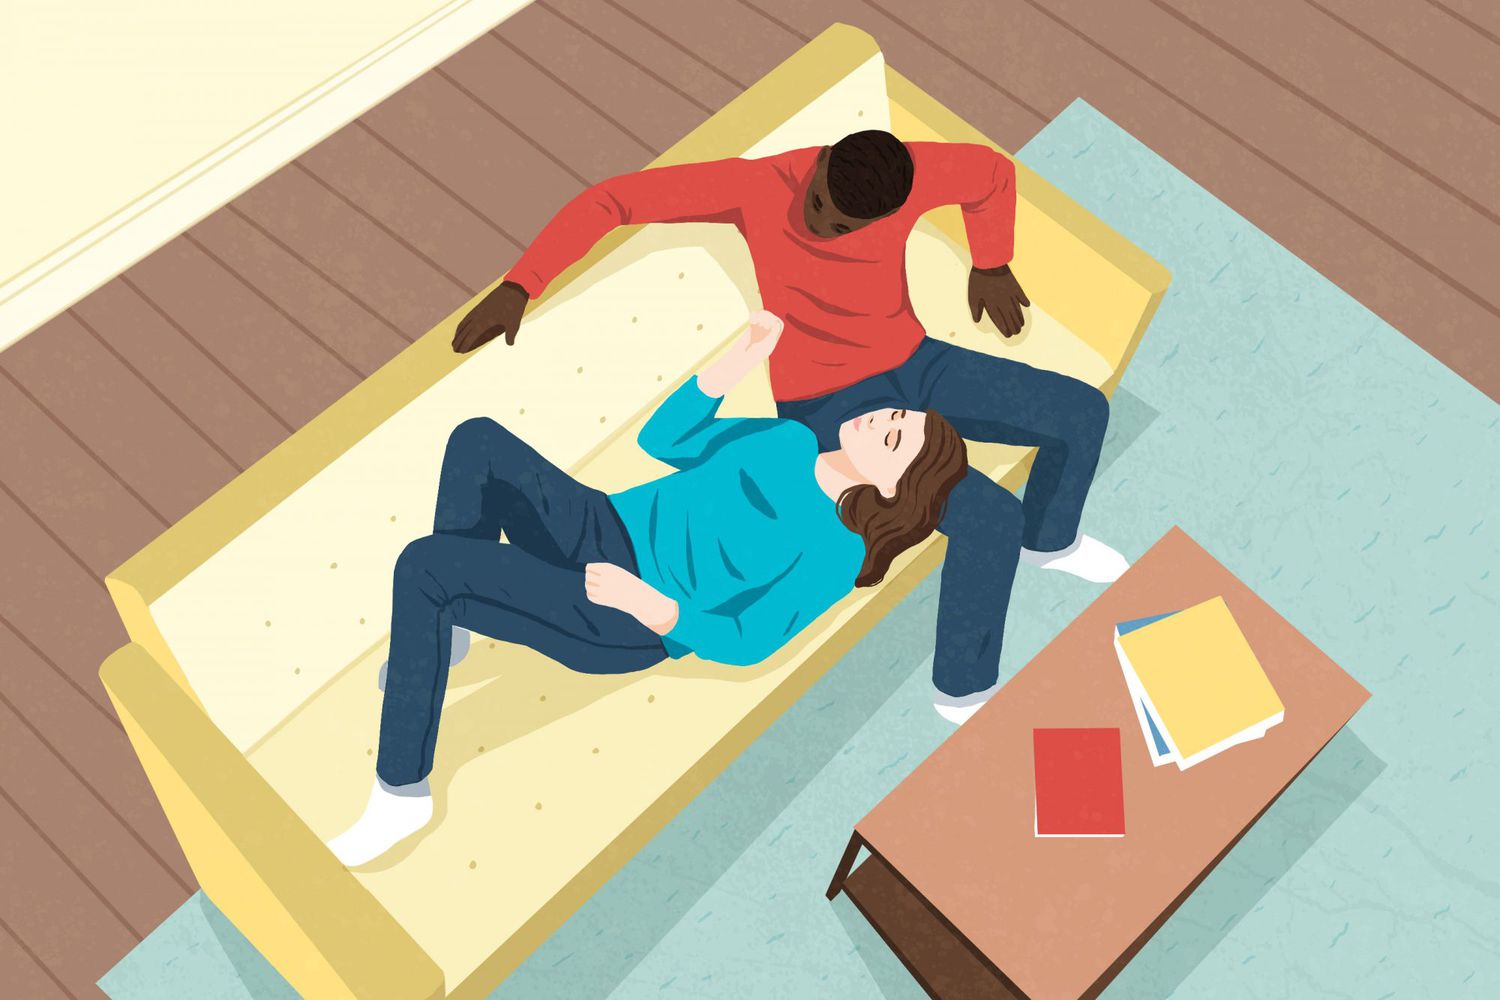 Illustration of woman and man cuddling on a yellow couch